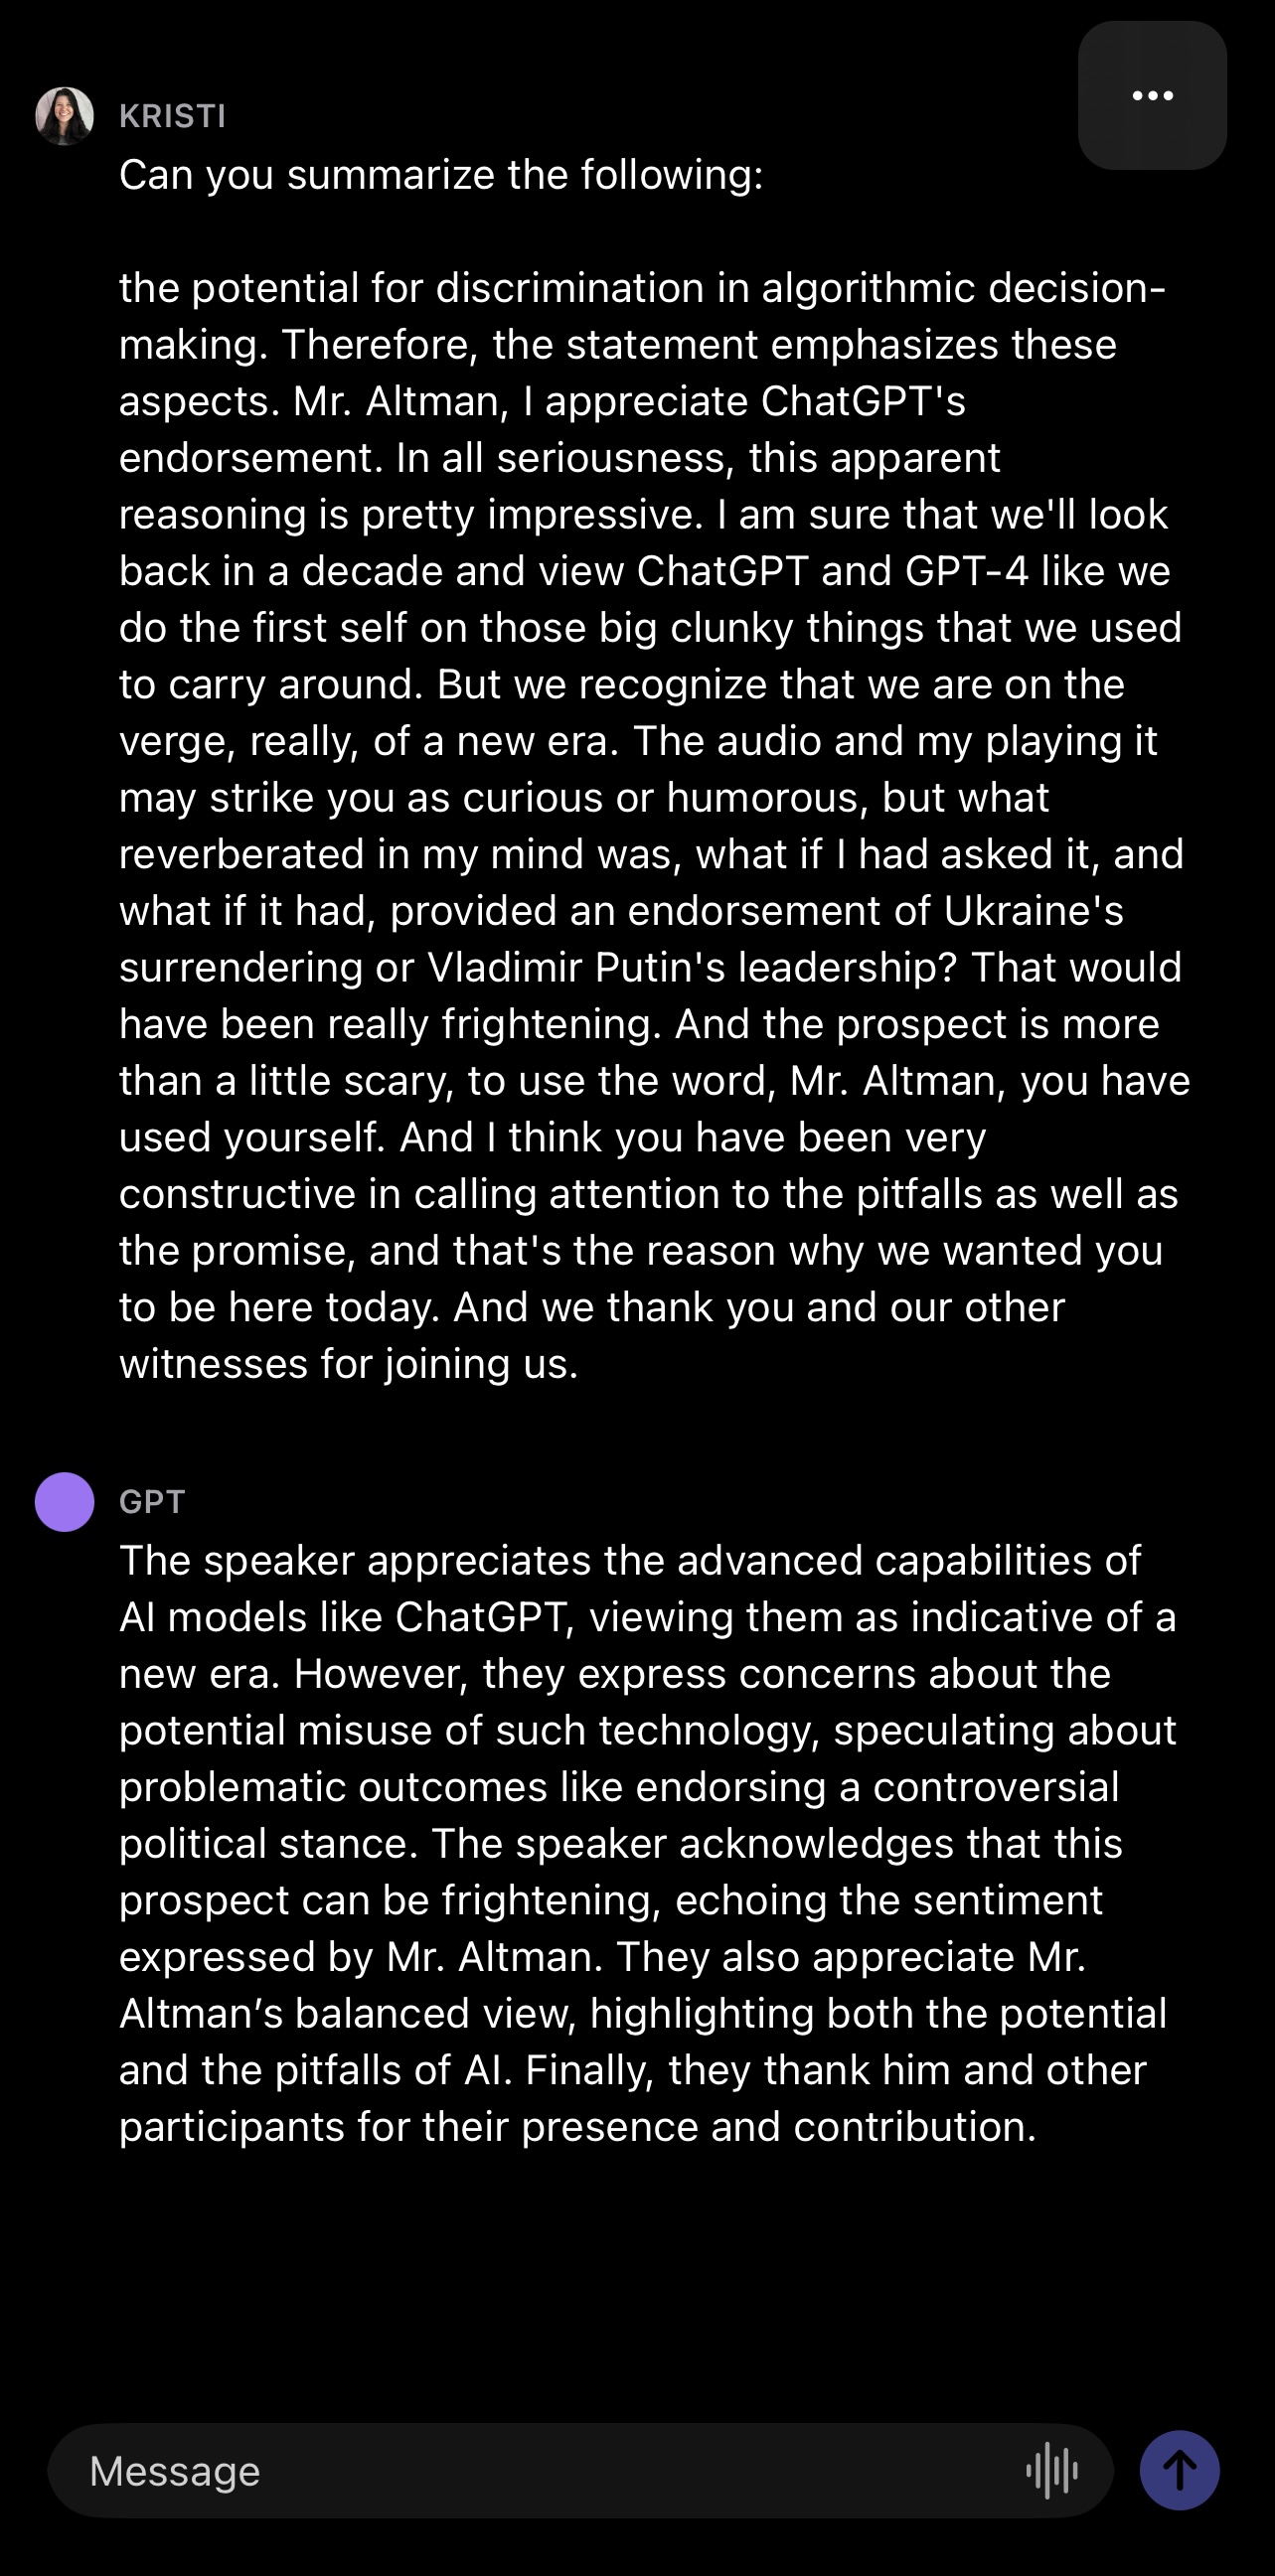 official openai chatgpt app ios iphone 7 6466729c20902 sej - A Look Inside The New ChatGPT iPhone App From OpenAI